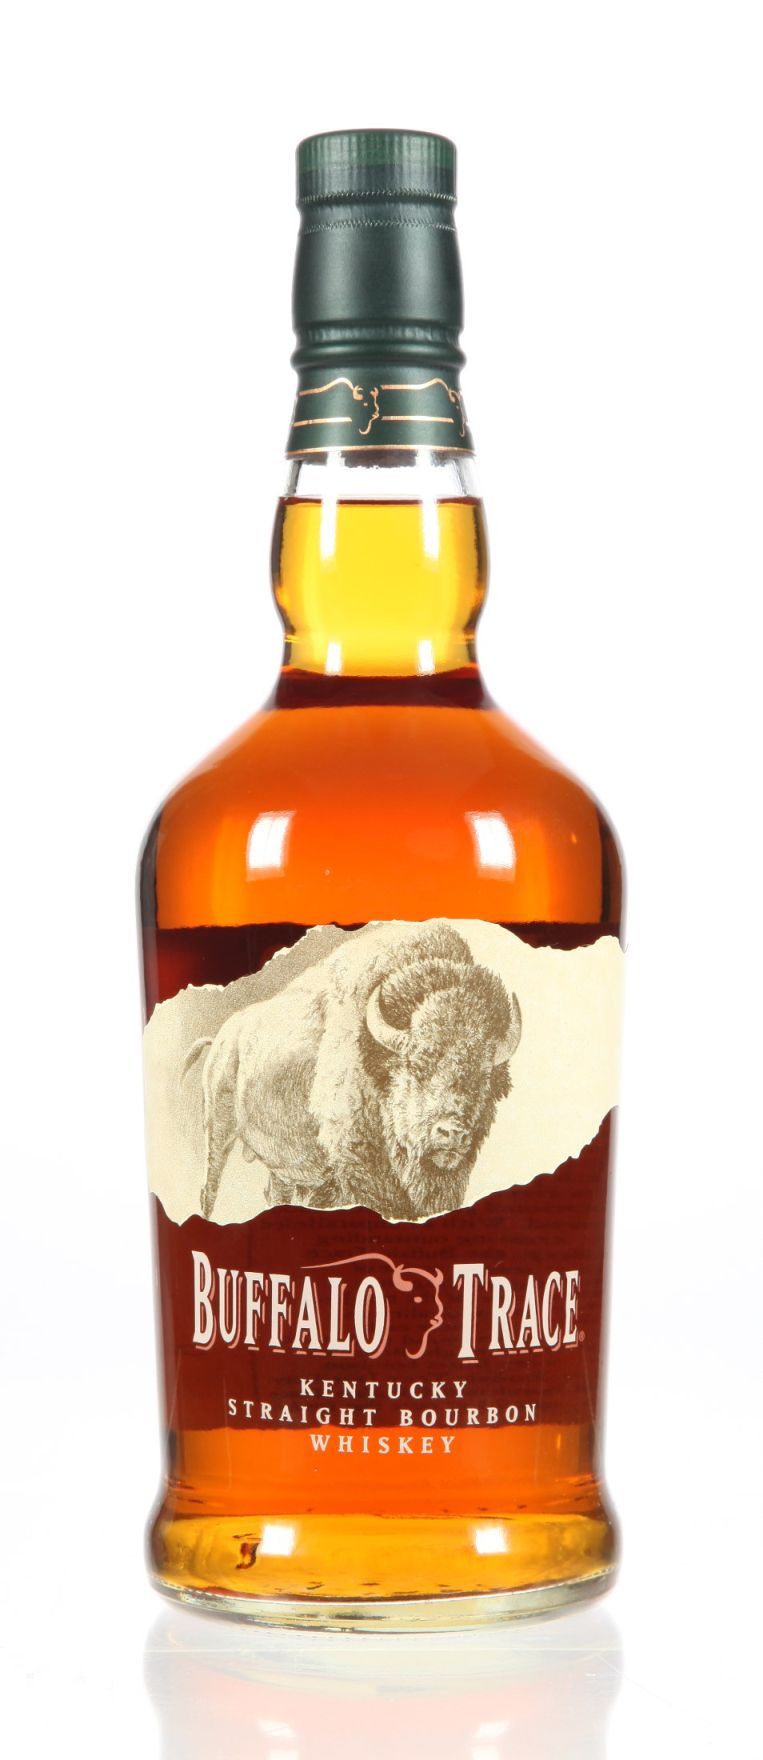 Buffalo Trace | Whisky.de » To the online store | Whisky